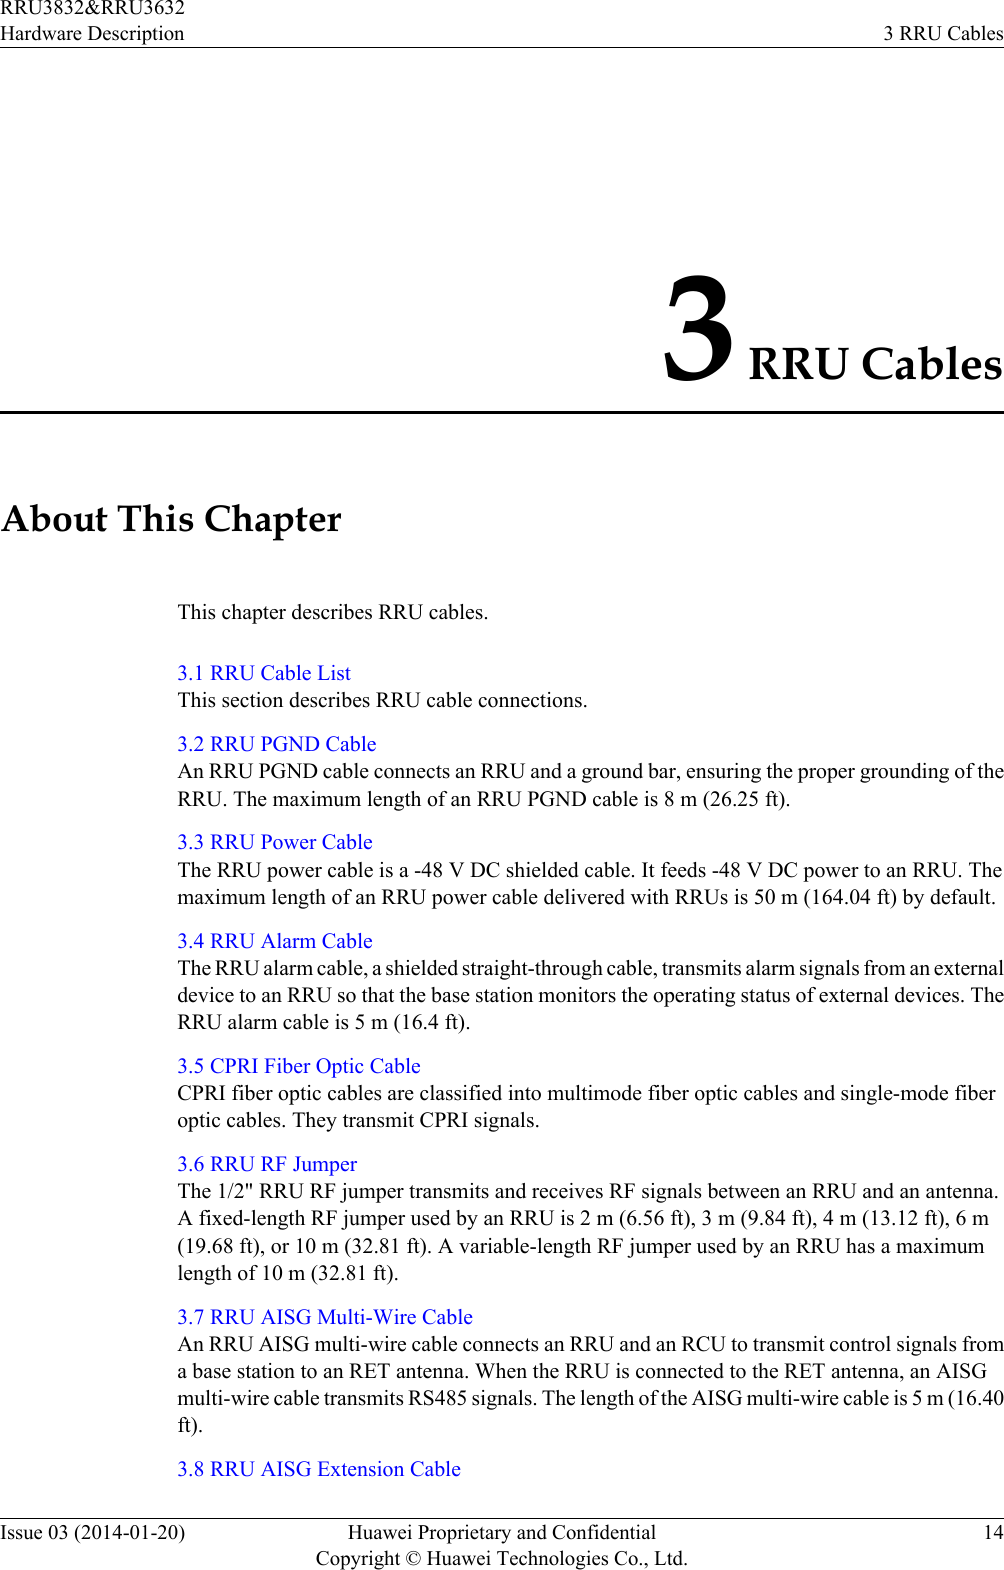 3 RRU CablesAbout This ChapterThis chapter describes RRU cables.3.1 RRU Cable ListThis section describes RRU cable connections.3.2 RRU PGND CableAn RRU PGND cable connects an RRU and a ground bar, ensuring the proper grounding of theRRU. The maximum length of an RRU PGND cable is 8 m (26.25 ft).3.3 RRU Power CableThe RRU power cable is a -48 V DC shielded cable. It feeds -48 V DC power to an RRU. Themaximum length of an RRU power cable delivered with RRUs is 50 m (164.04 ft) by default.3.4 RRU Alarm CableThe RRU alarm cable, a shielded straight-through cable, transmits alarm signals from an externaldevice to an RRU so that the base station monitors the operating status of external devices. TheRRU alarm cable is 5 m (16.4 ft).3.5 CPRI Fiber Optic CableCPRI fiber optic cables are classified into multimode fiber optic cables and single-mode fiberoptic cables. They transmit CPRI signals.3.6 RRU RF JumperThe 1/2&quot; RRU RF jumper transmits and receives RF signals between an RRU and an antenna.A fixed-length RF jumper used by an RRU is 2 m (6.56 ft), 3 m (9.84 ft), 4 m (13.12 ft), 6 m(19.68 ft), or 10 m (32.81 ft). A variable-length RF jumper used by an RRU has a maximumlength of 10 m (32.81 ft).3.7 RRU AISG Multi-Wire CableAn RRU AISG multi-wire cable connects an RRU and an RCU to transmit control signals froma base station to an RET antenna. When the RRU is connected to the RET antenna, an AISGmulti-wire cable transmits RS485 signals. The length of the AISG multi-wire cable is 5 m (16.40ft).3.8 RRU AISG Extension CableRRU3832&amp;RRU3632Hardware Description 3 RRU CablesIssue 03 (2014-01-20) Huawei Proprietary and ConfidentialCopyright © Huawei Technologies Co., Ltd.14